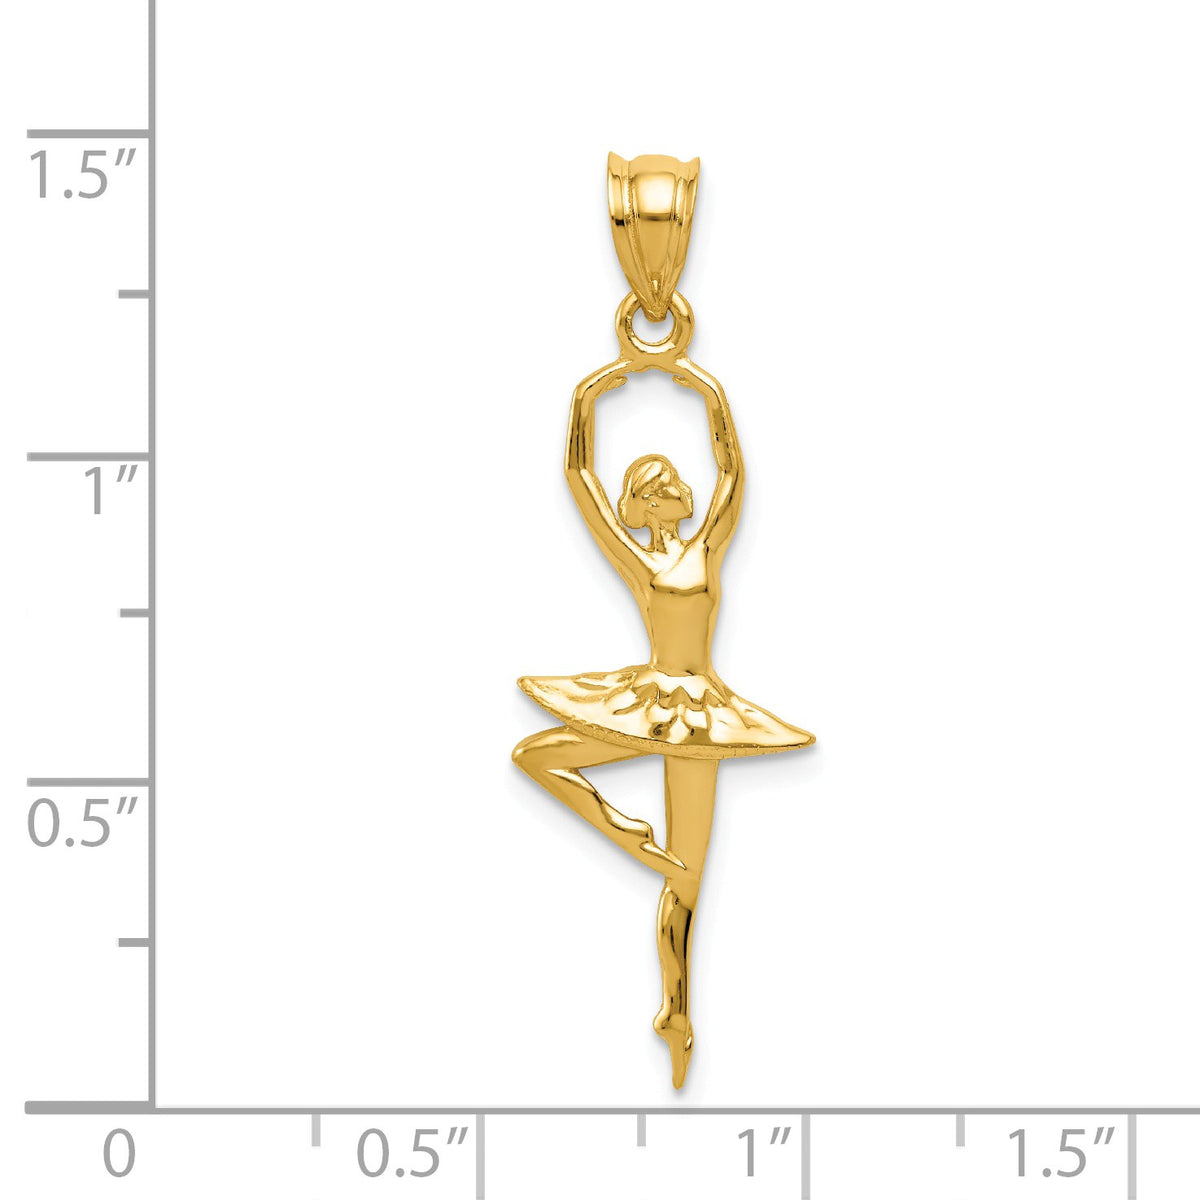 Alternate view of the 14k Yellow Gold Pointe Ballerina Pendant by The Black Bow Jewelry Co.